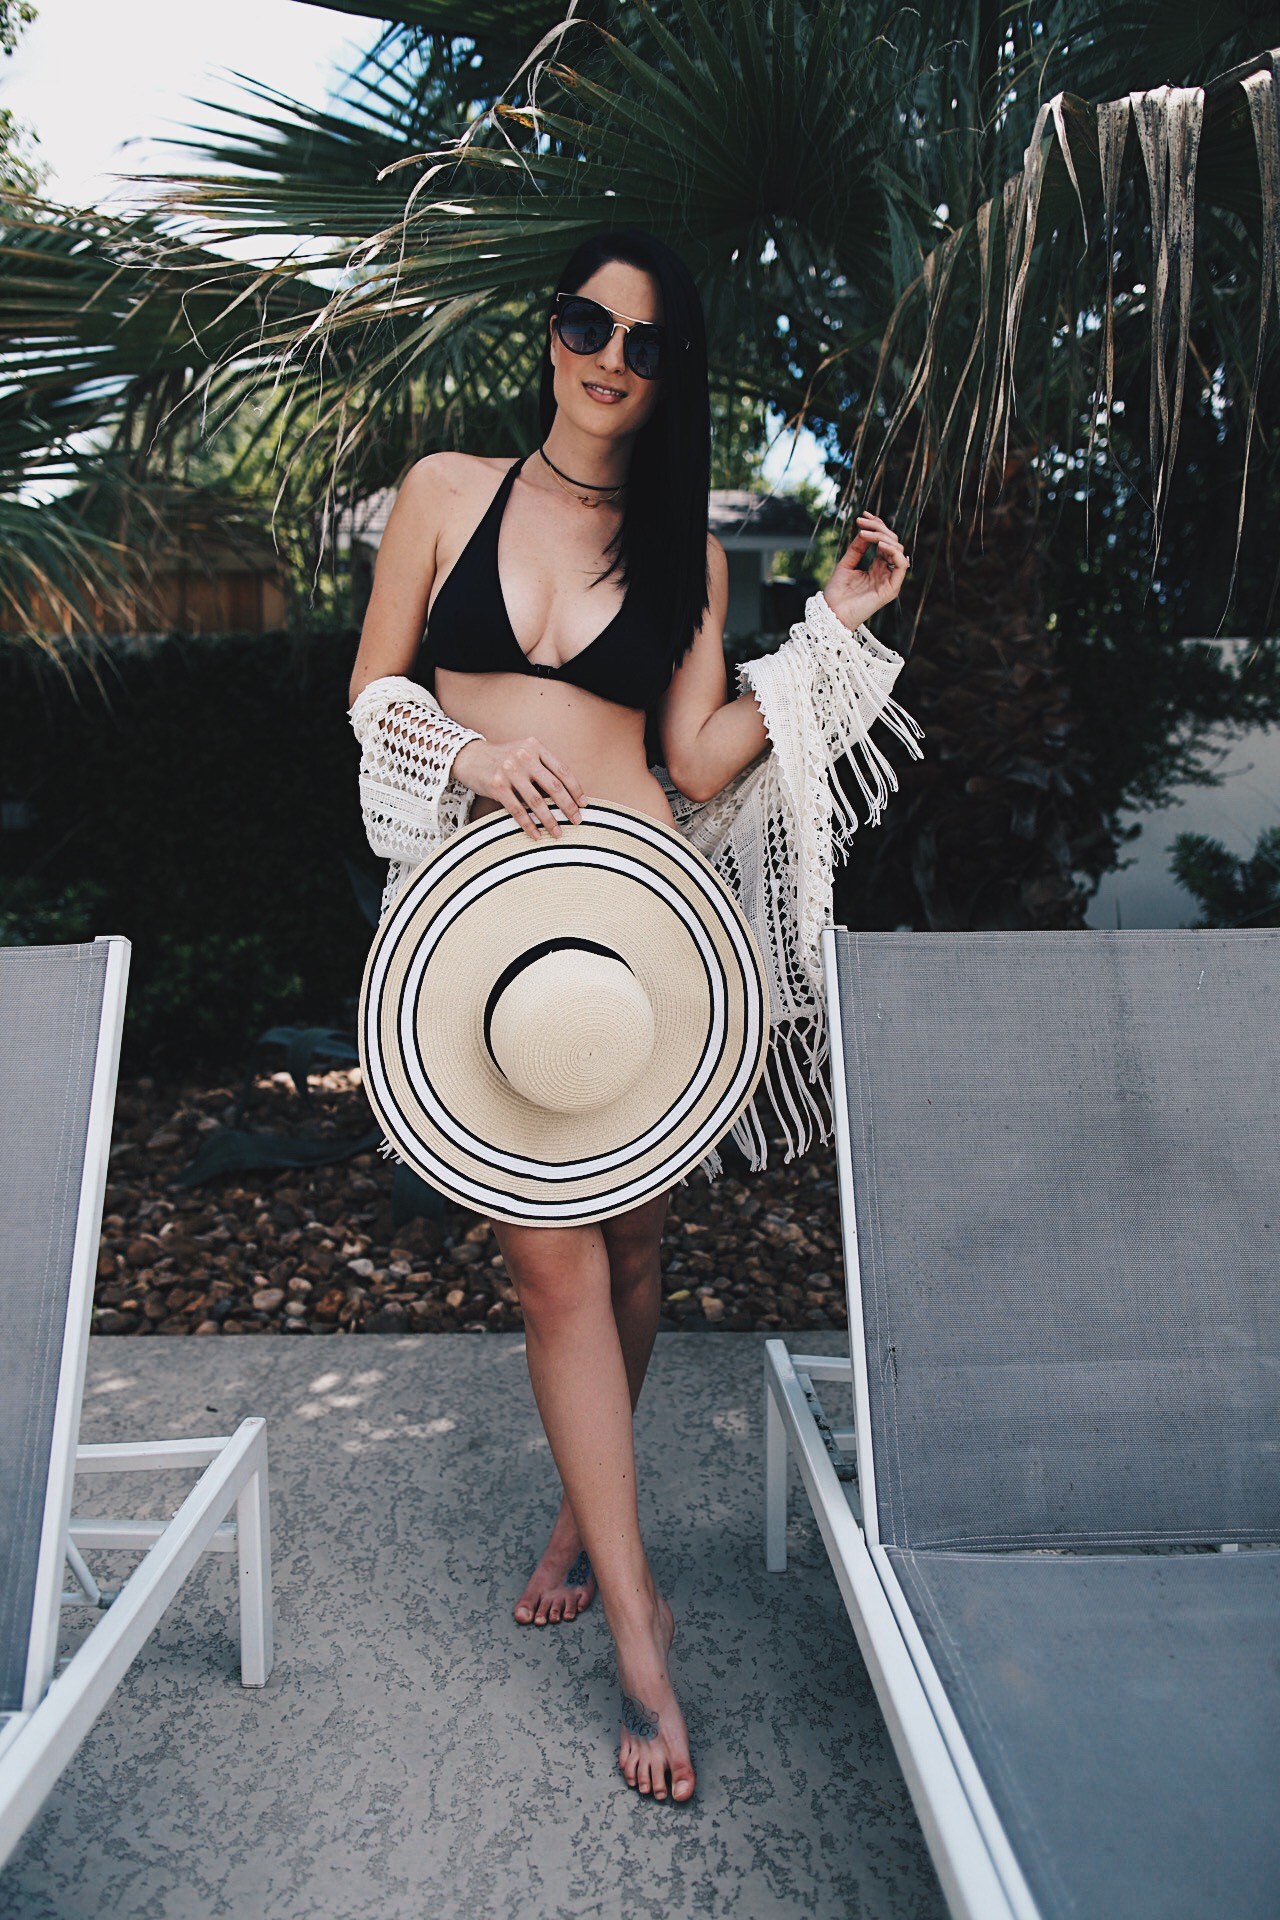 DTKAustin is sharing her pool day essentials and favorite affordable little black bikinis! Click for more pool day pics and outfit details.